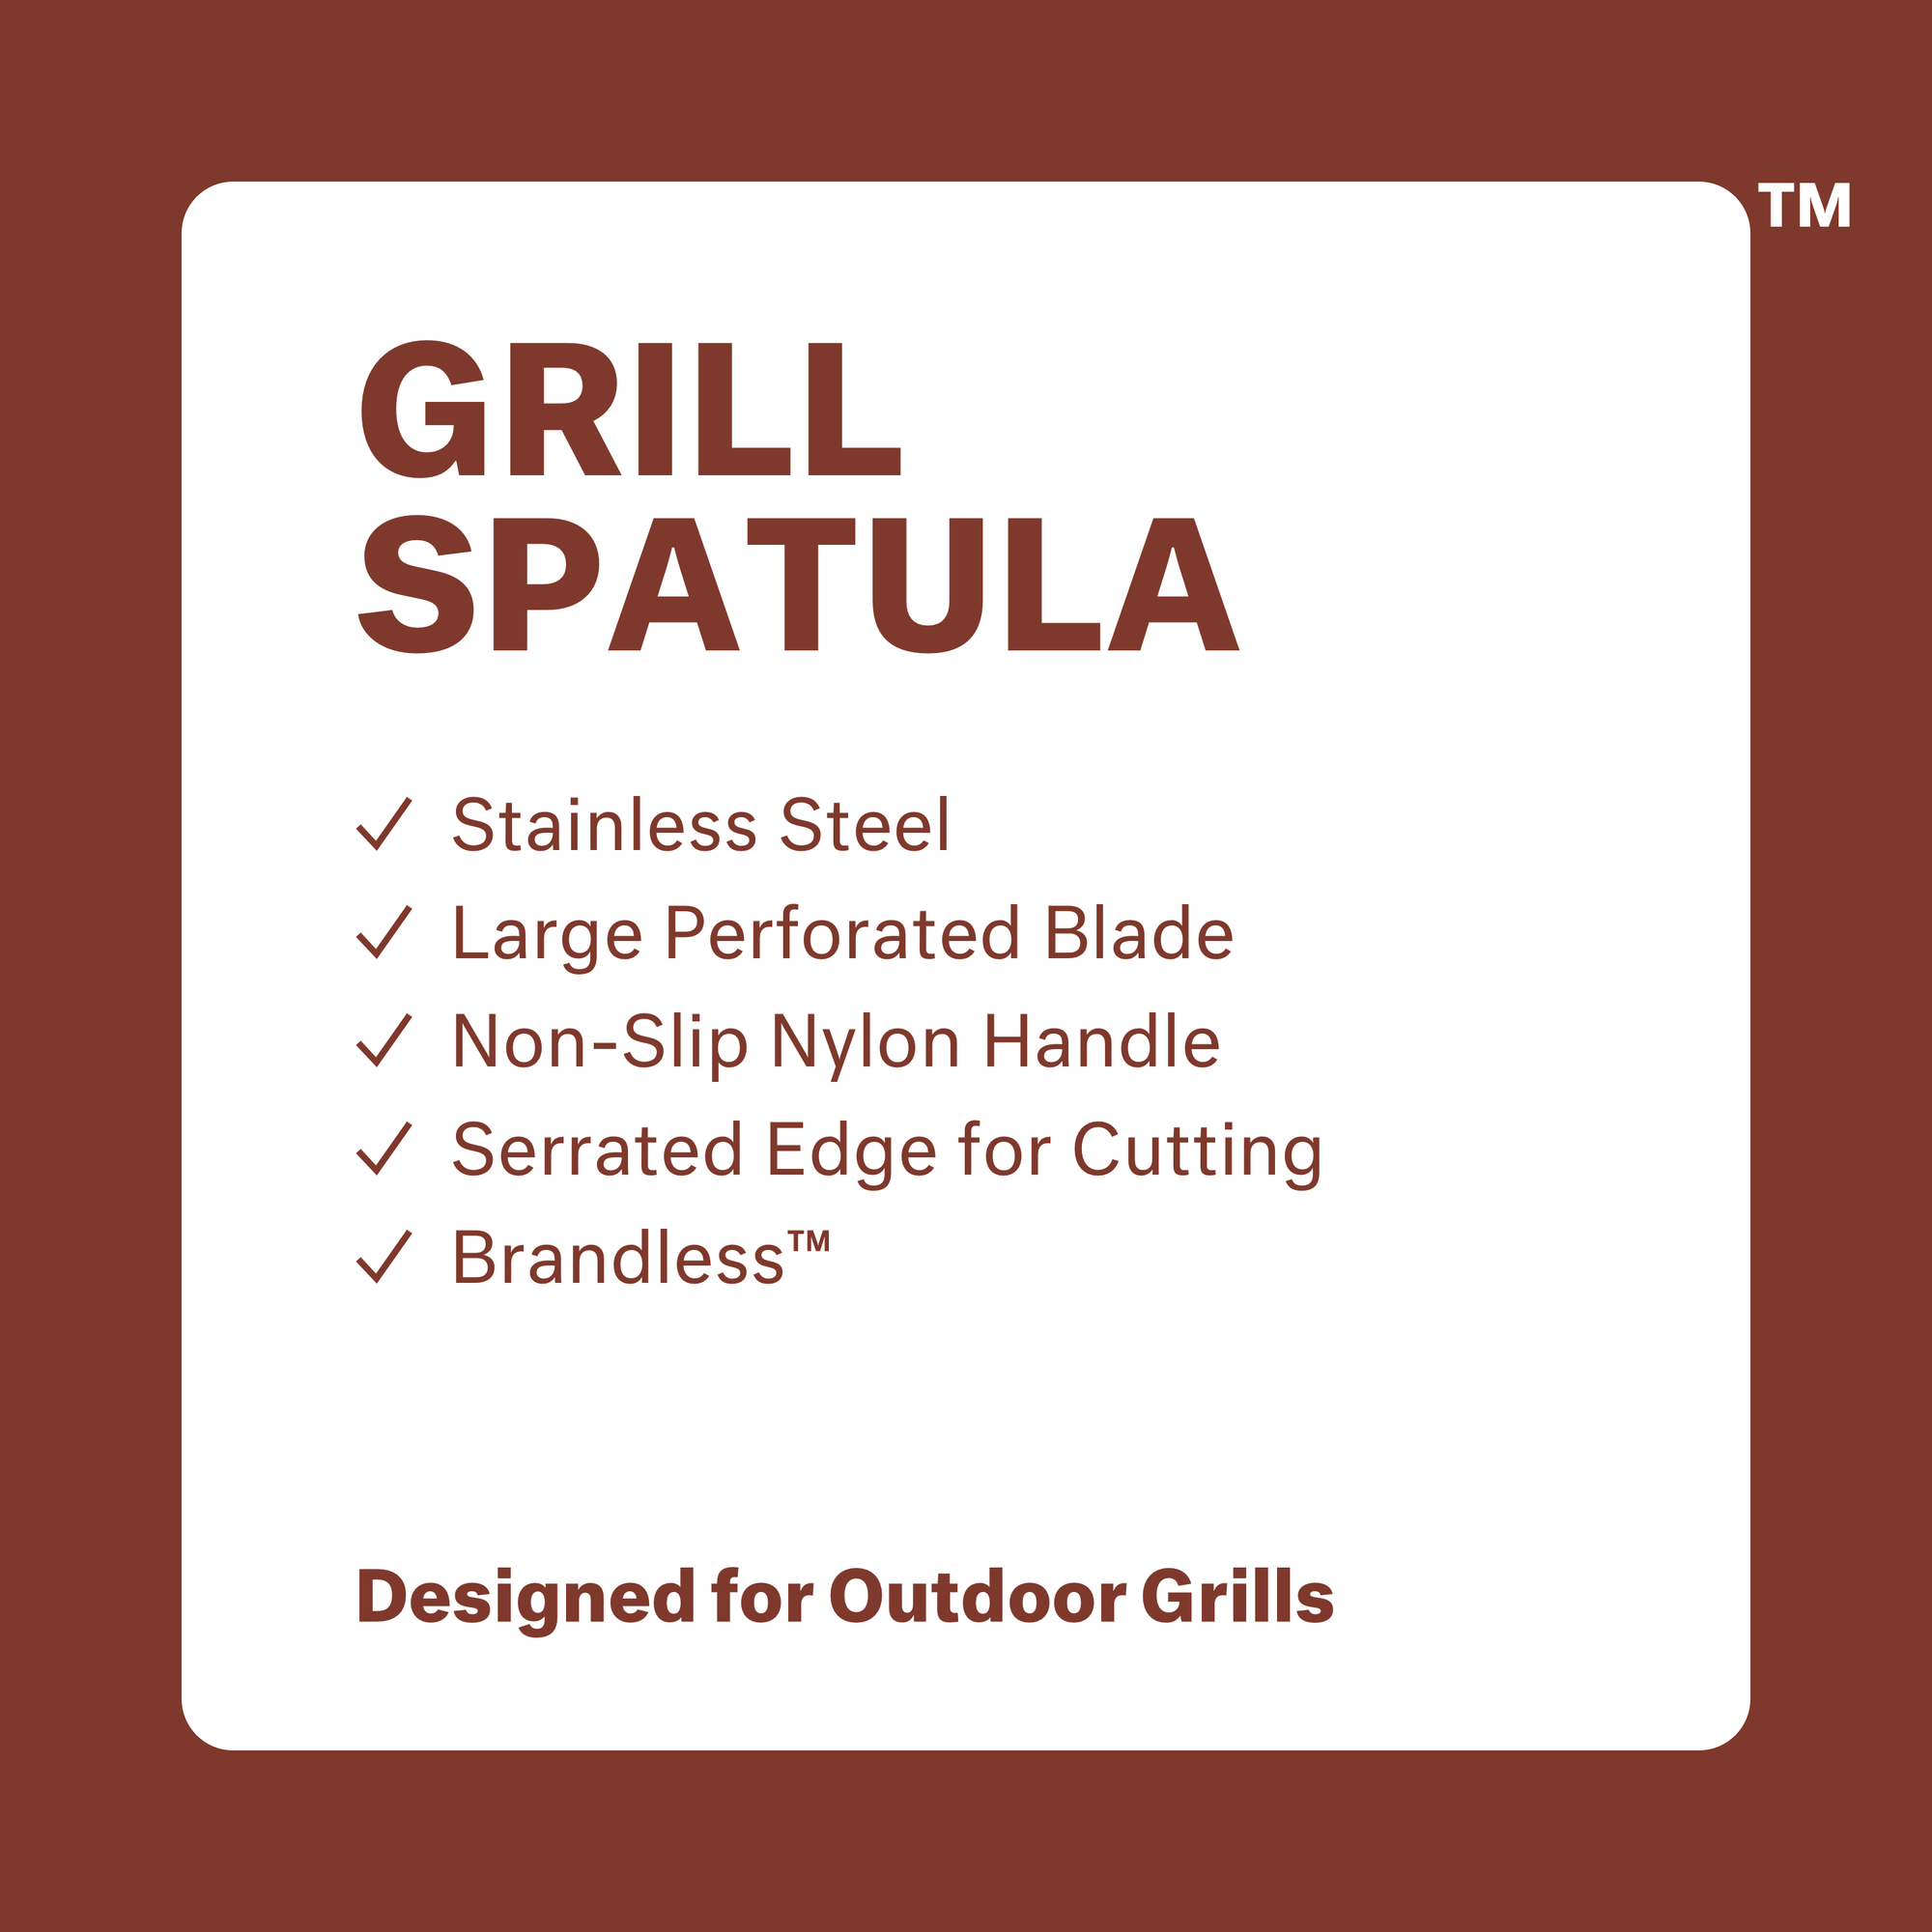 https://cdn.shopify.com/s/files/1/0291/6427/3757/products/53051_grill_spatula_atsw_2000x.png?v=1671780642